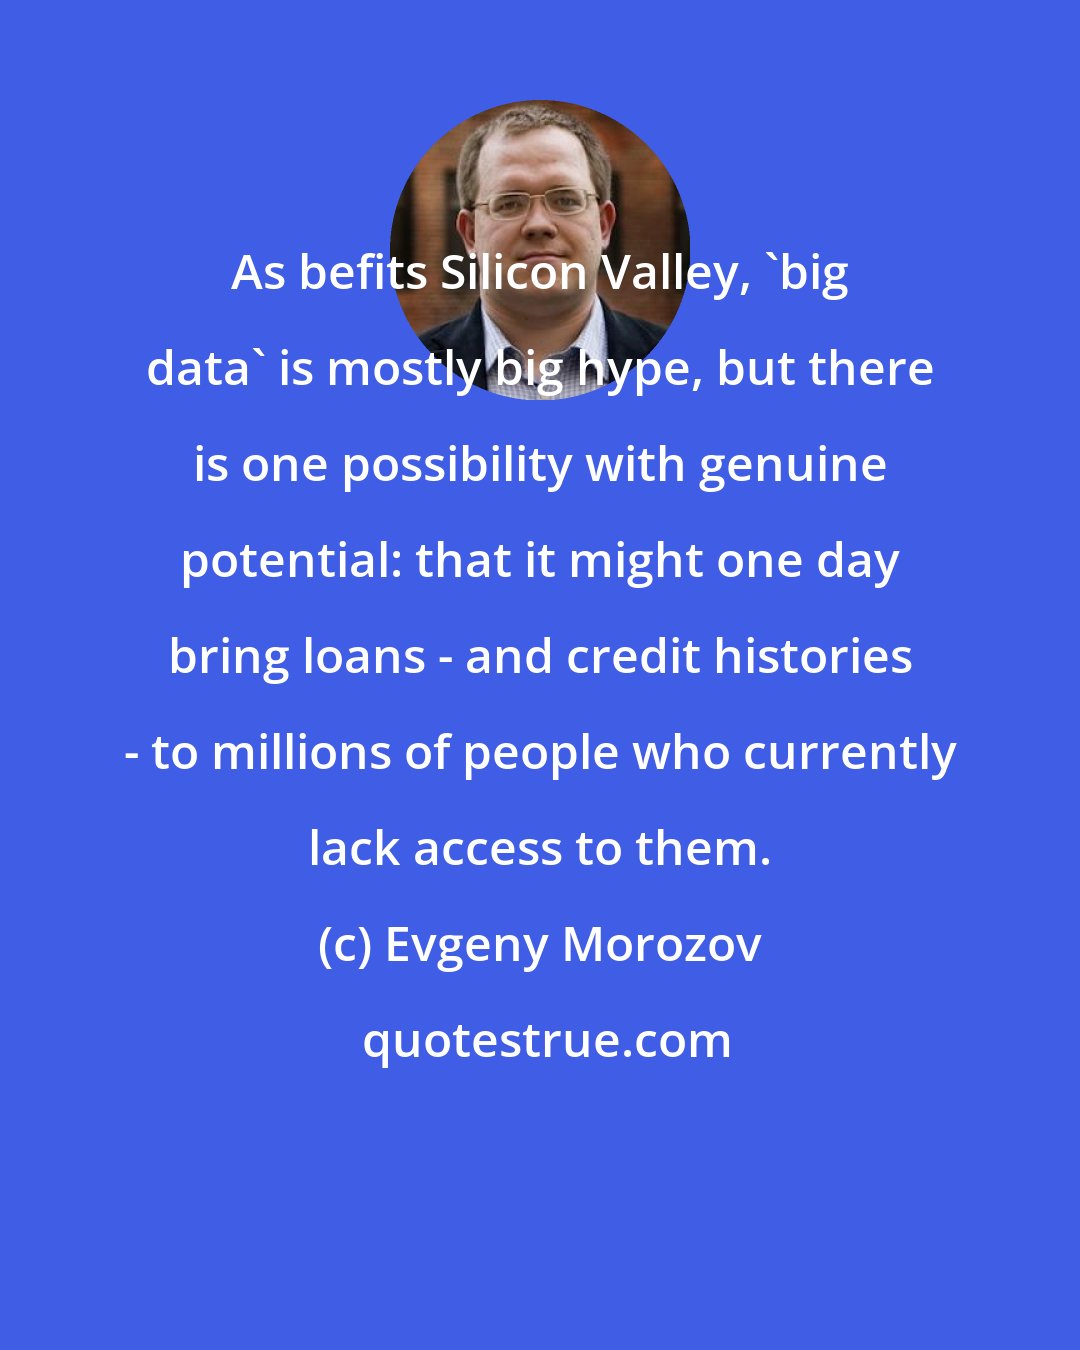 Evgeny Morozov: As befits Silicon Valley, 'big data' is mostly big hype, but there is one possibility with genuine potential: that it might one day bring loans - and credit histories - to millions of people who currently lack access to them.